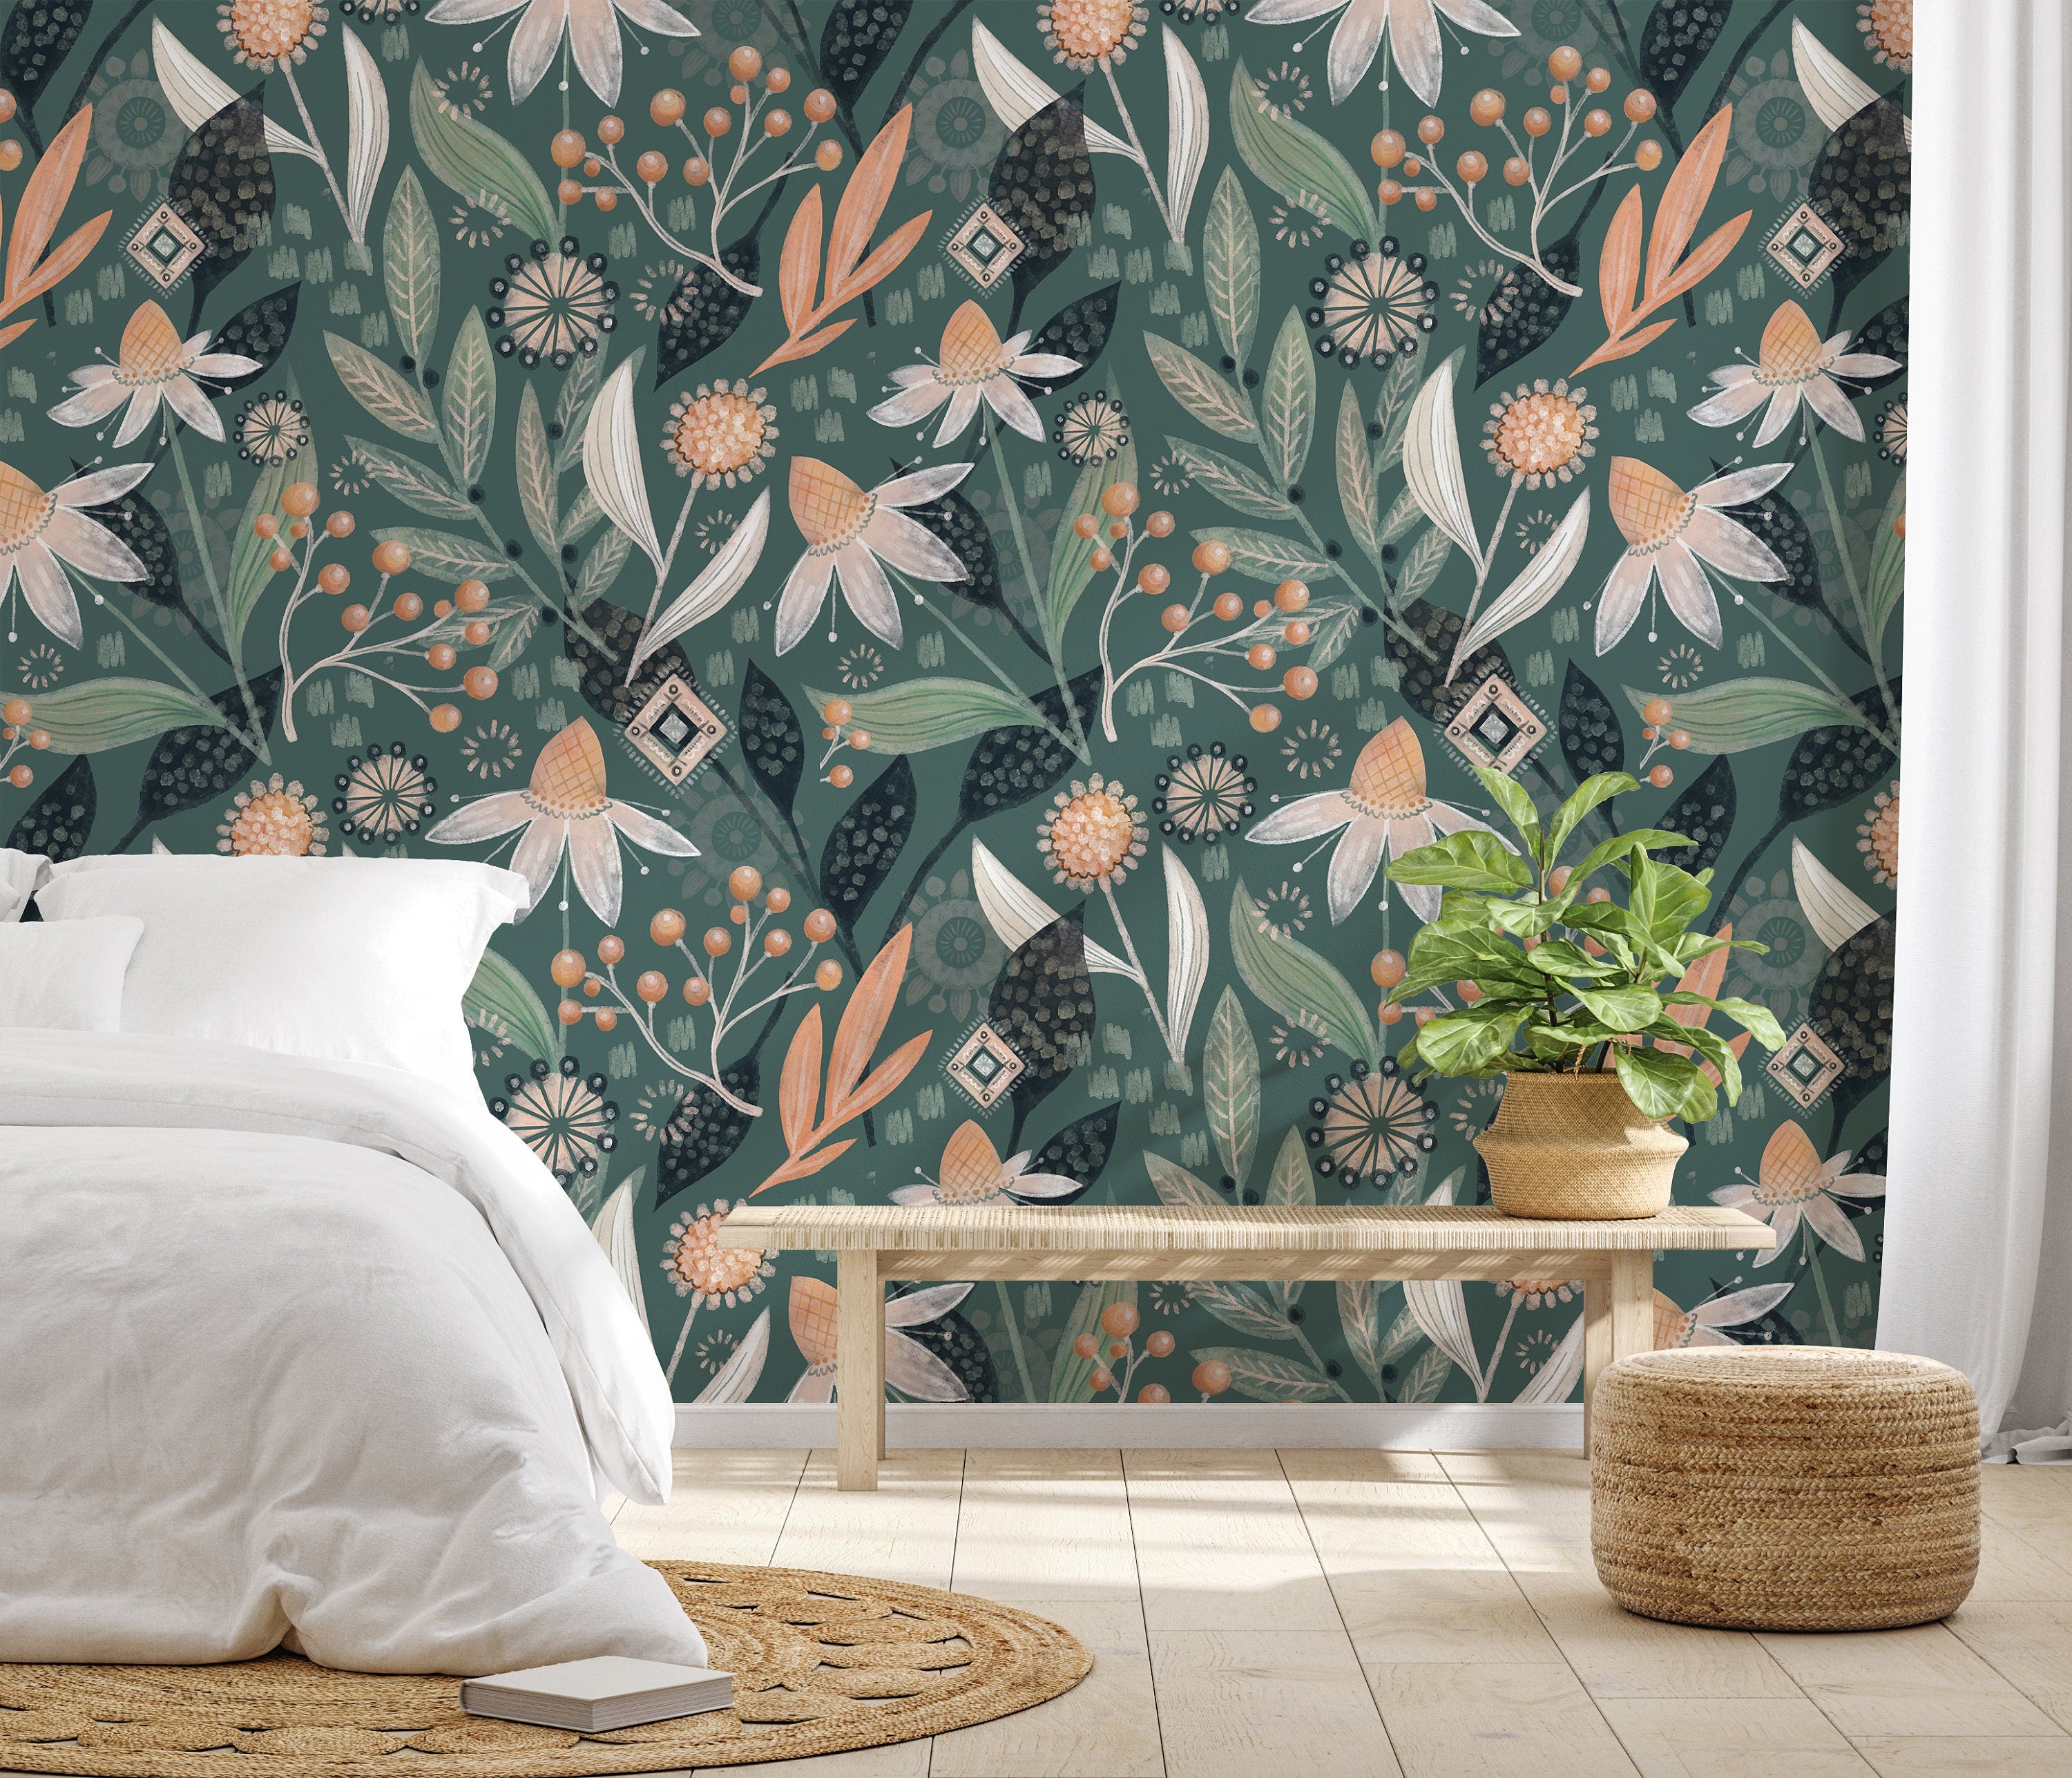 Green and White Wallpaper Peel and Stick Wallpaper Boho Contact Paper for  Cabinets Leaf Wallpaper for Bedroom SelfAdhesive Removable Wallpaper  Herringbone Wallpaper Drawer Kids Wallpaper 173393  Amazoncomau  Home Improvement